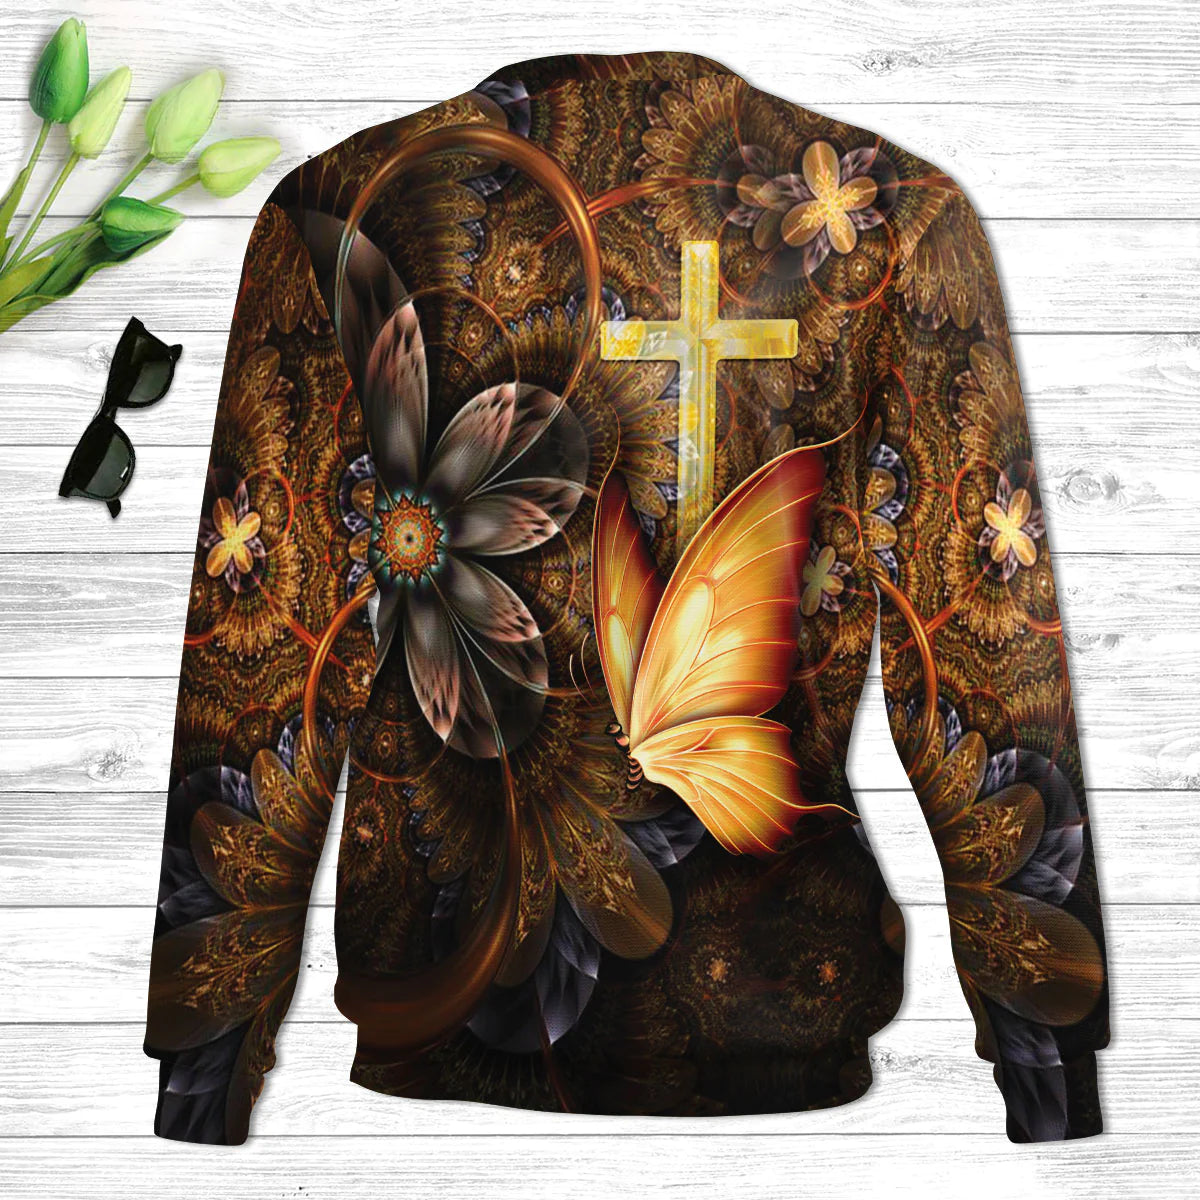 Christianartbag 3D Sweater, Be Still And Know That I Am God Psalm 46:10, Unisex Sweater, Christmas Gift. - Christian Art Bag